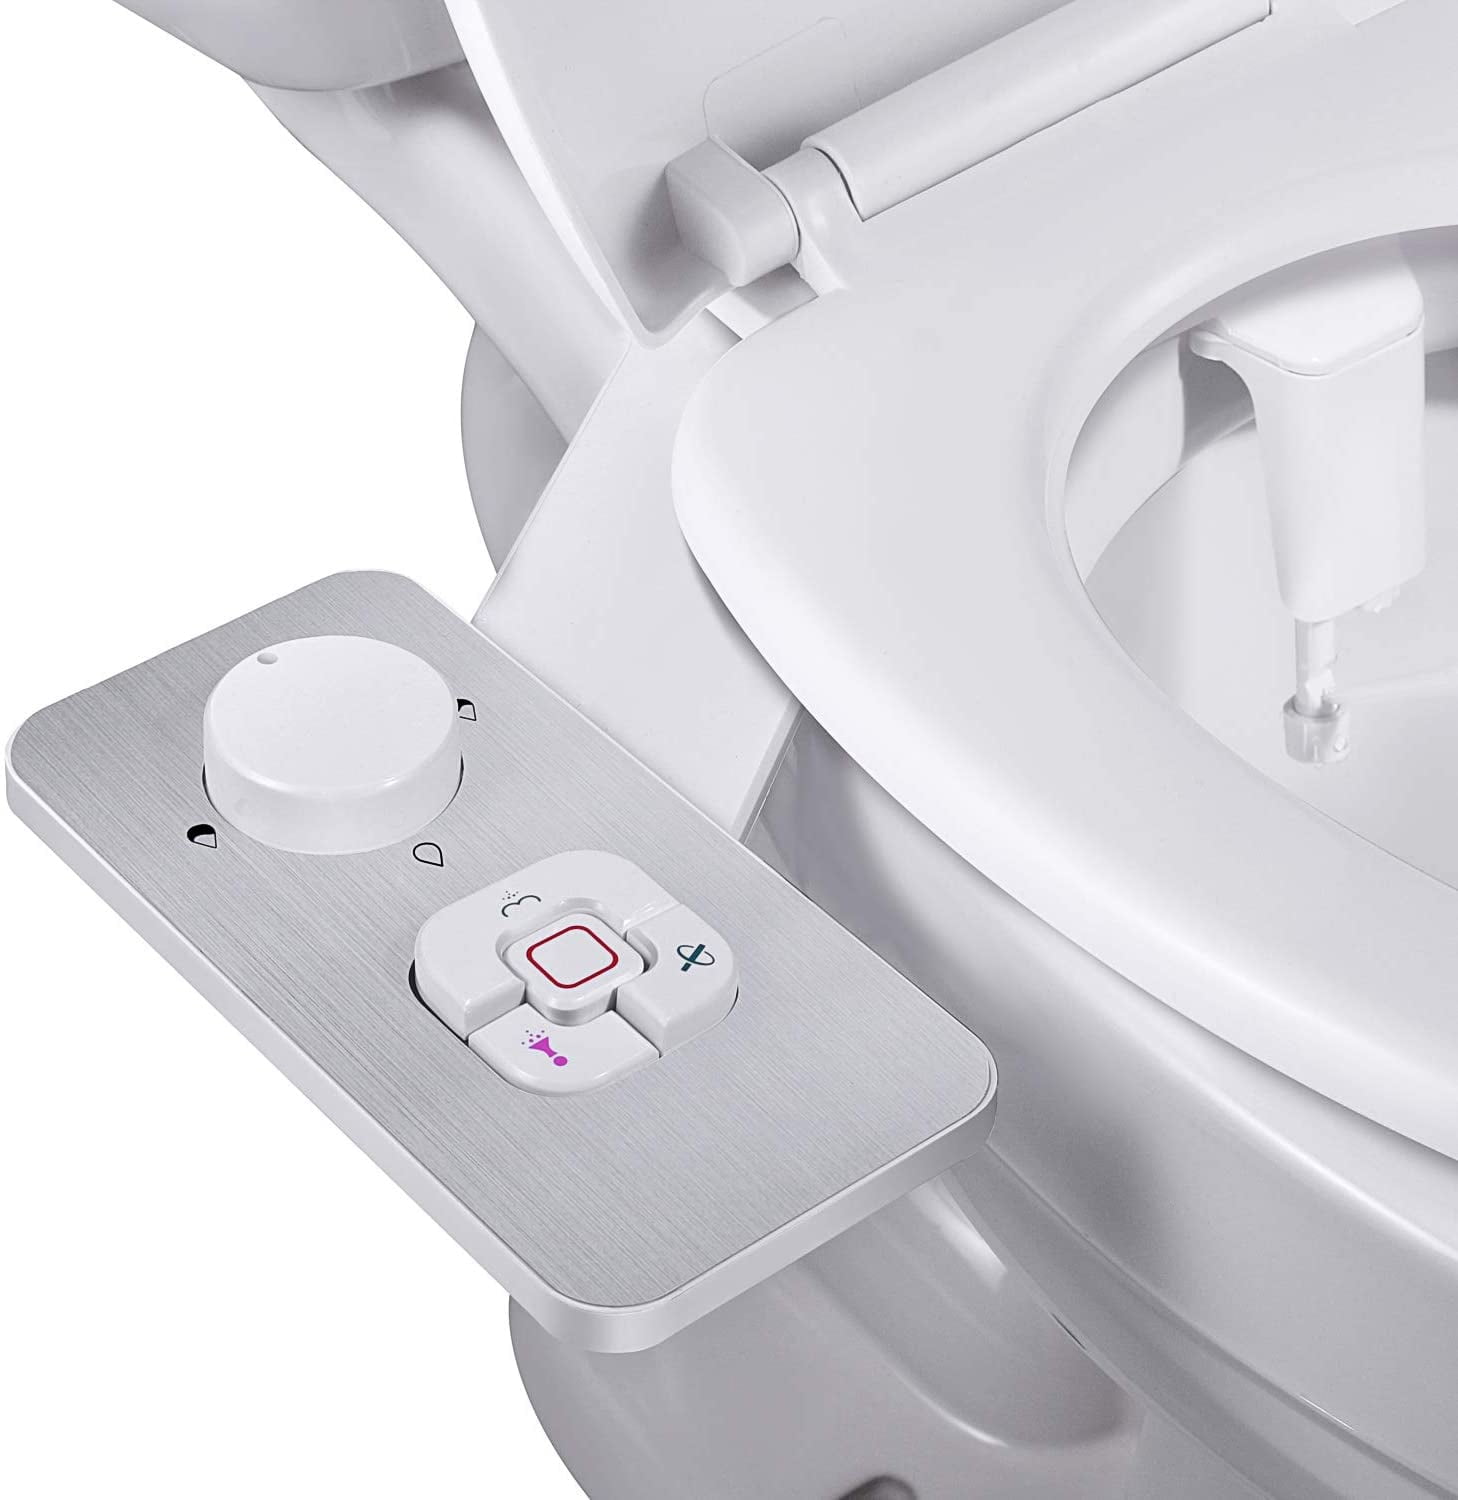 Water Spray Dual Nozzle Non-Electric Bidet Toilet Seat Attachment Self-Cleaning 